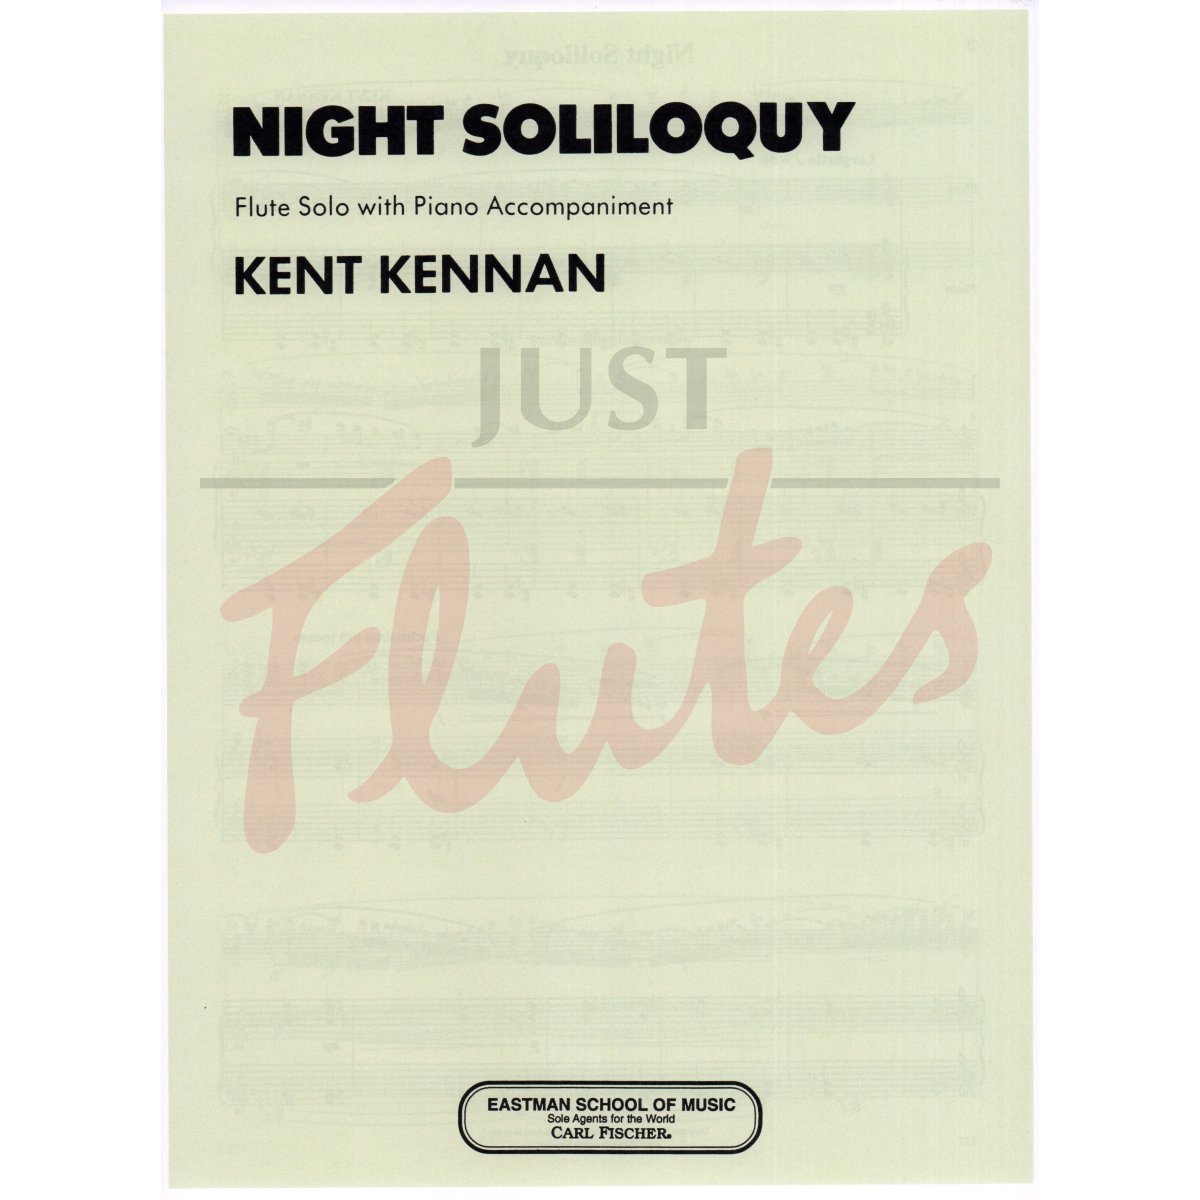 Night Soliloquy for Flute and Piano